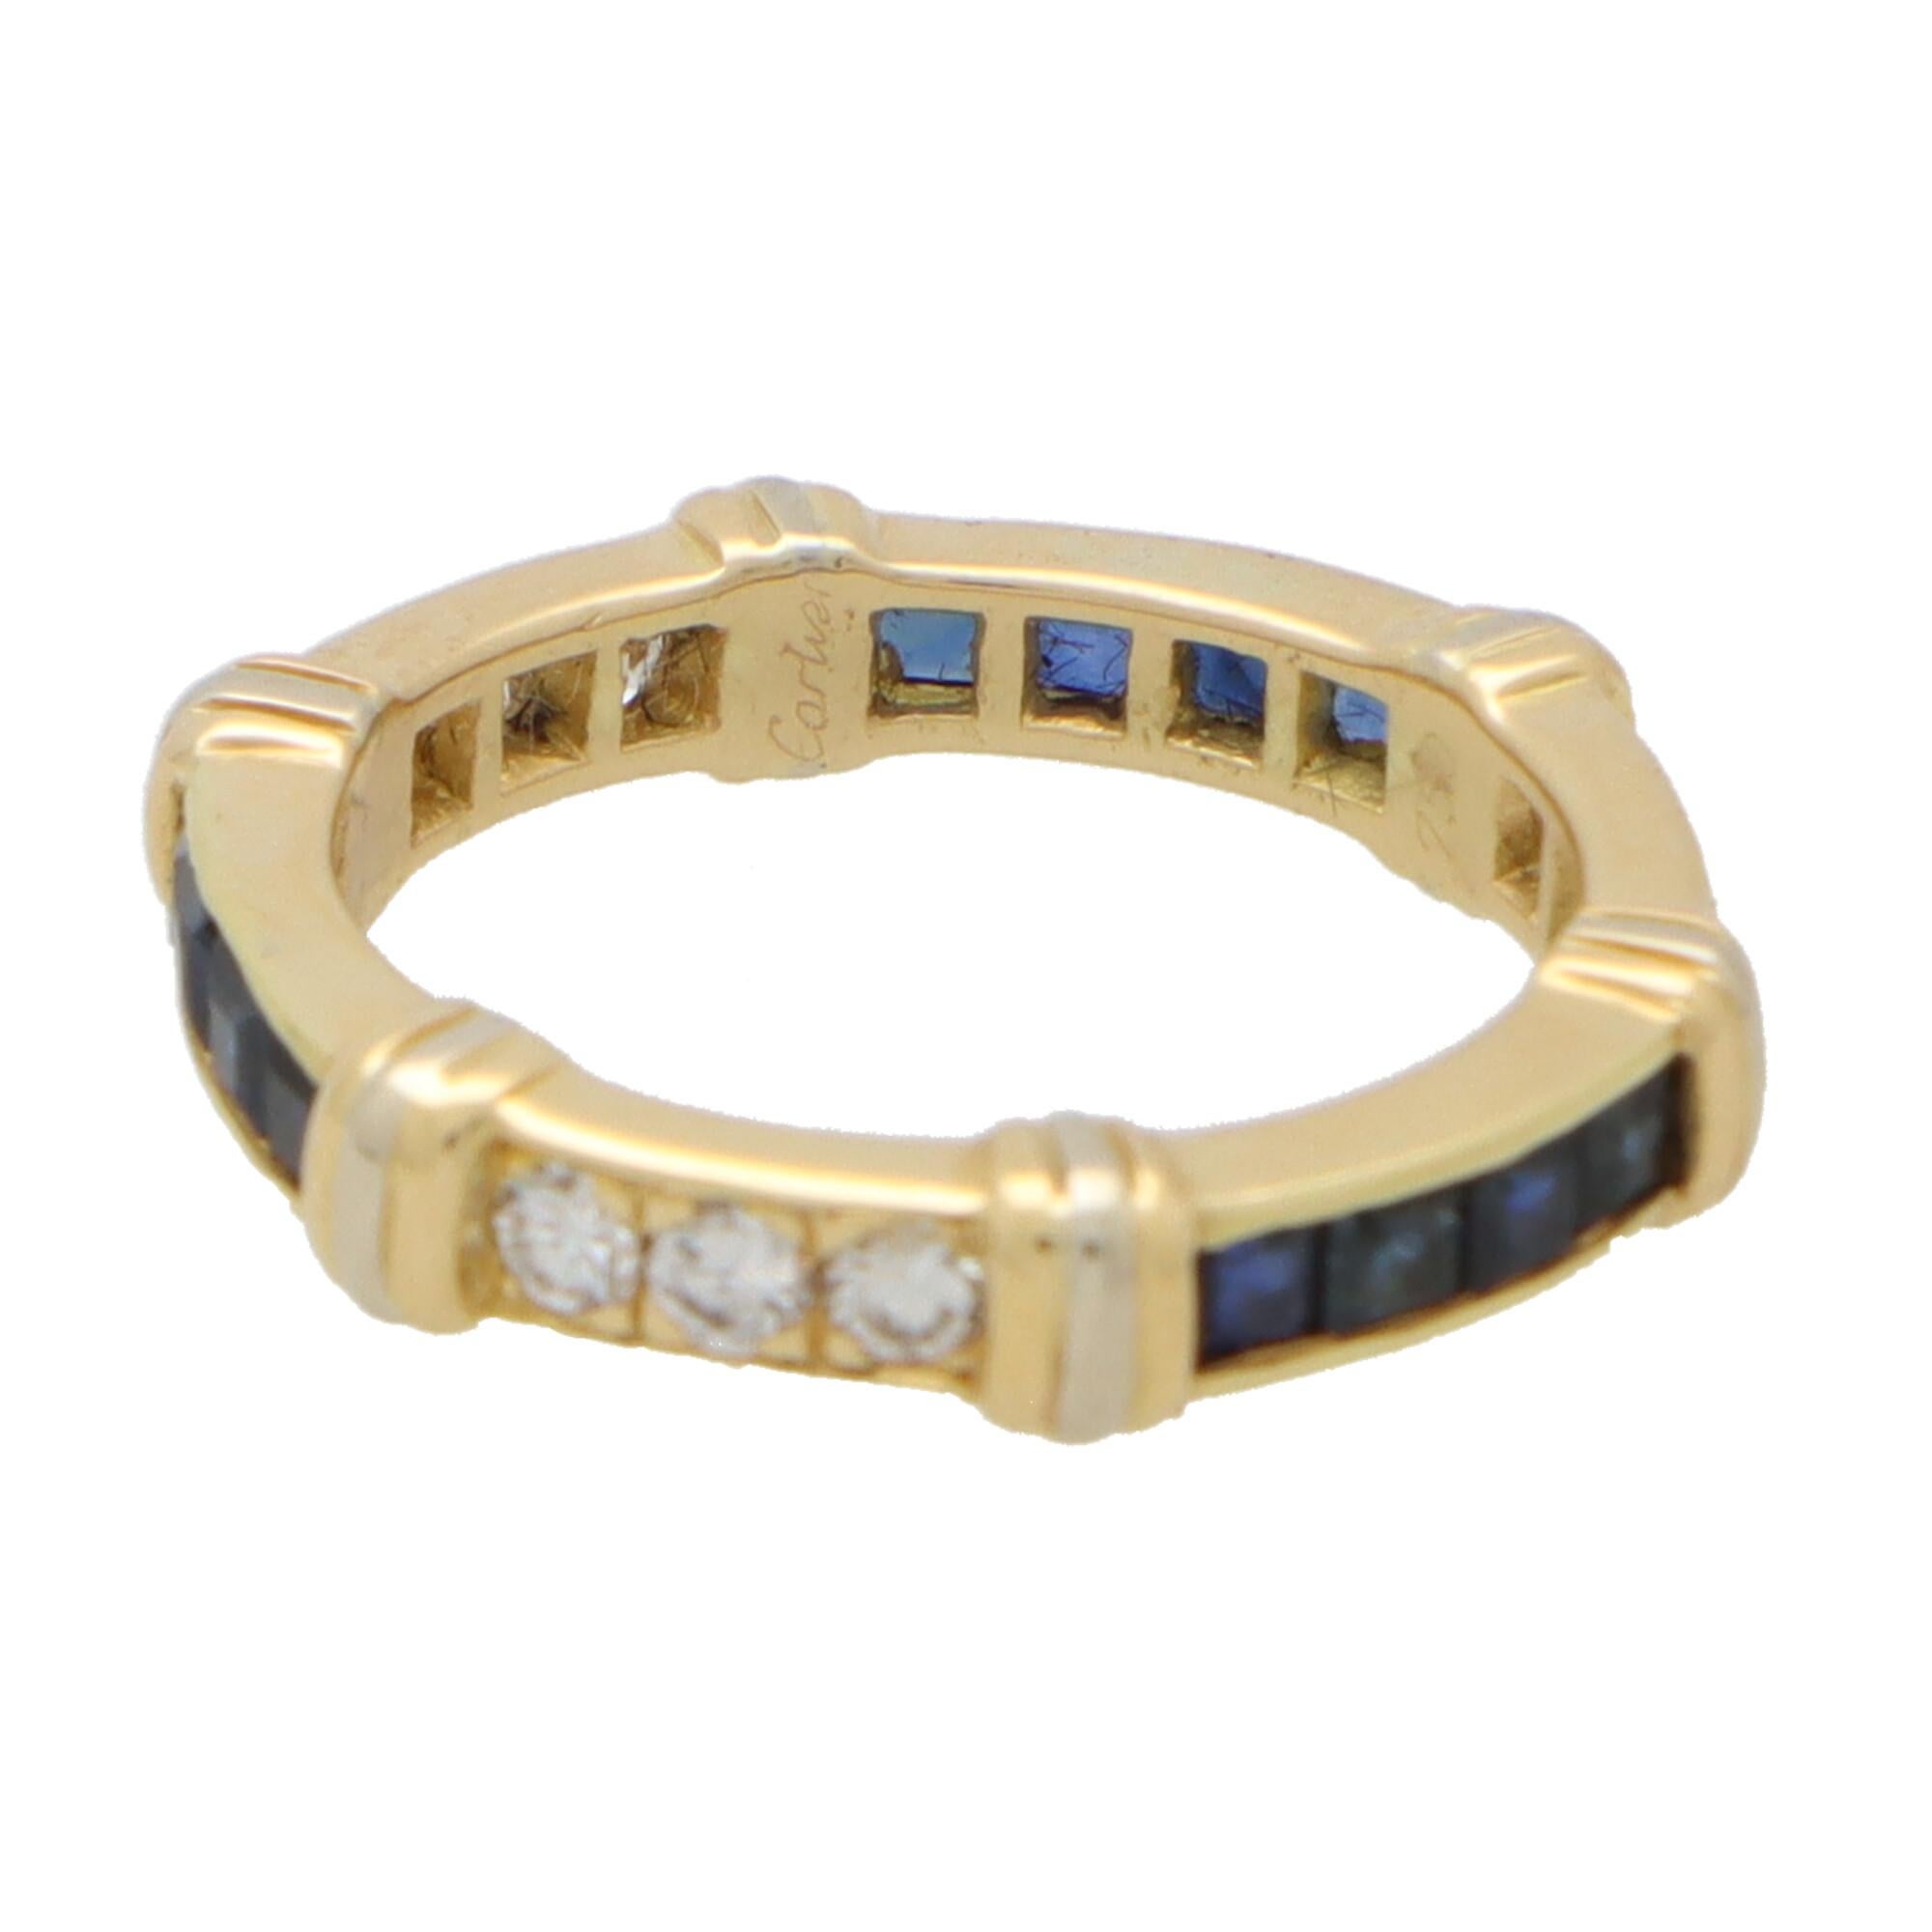 Round Cut Vintage Cartier Sapphire and Diamond Eternity Band Ring Set in 18k Yellow Gold